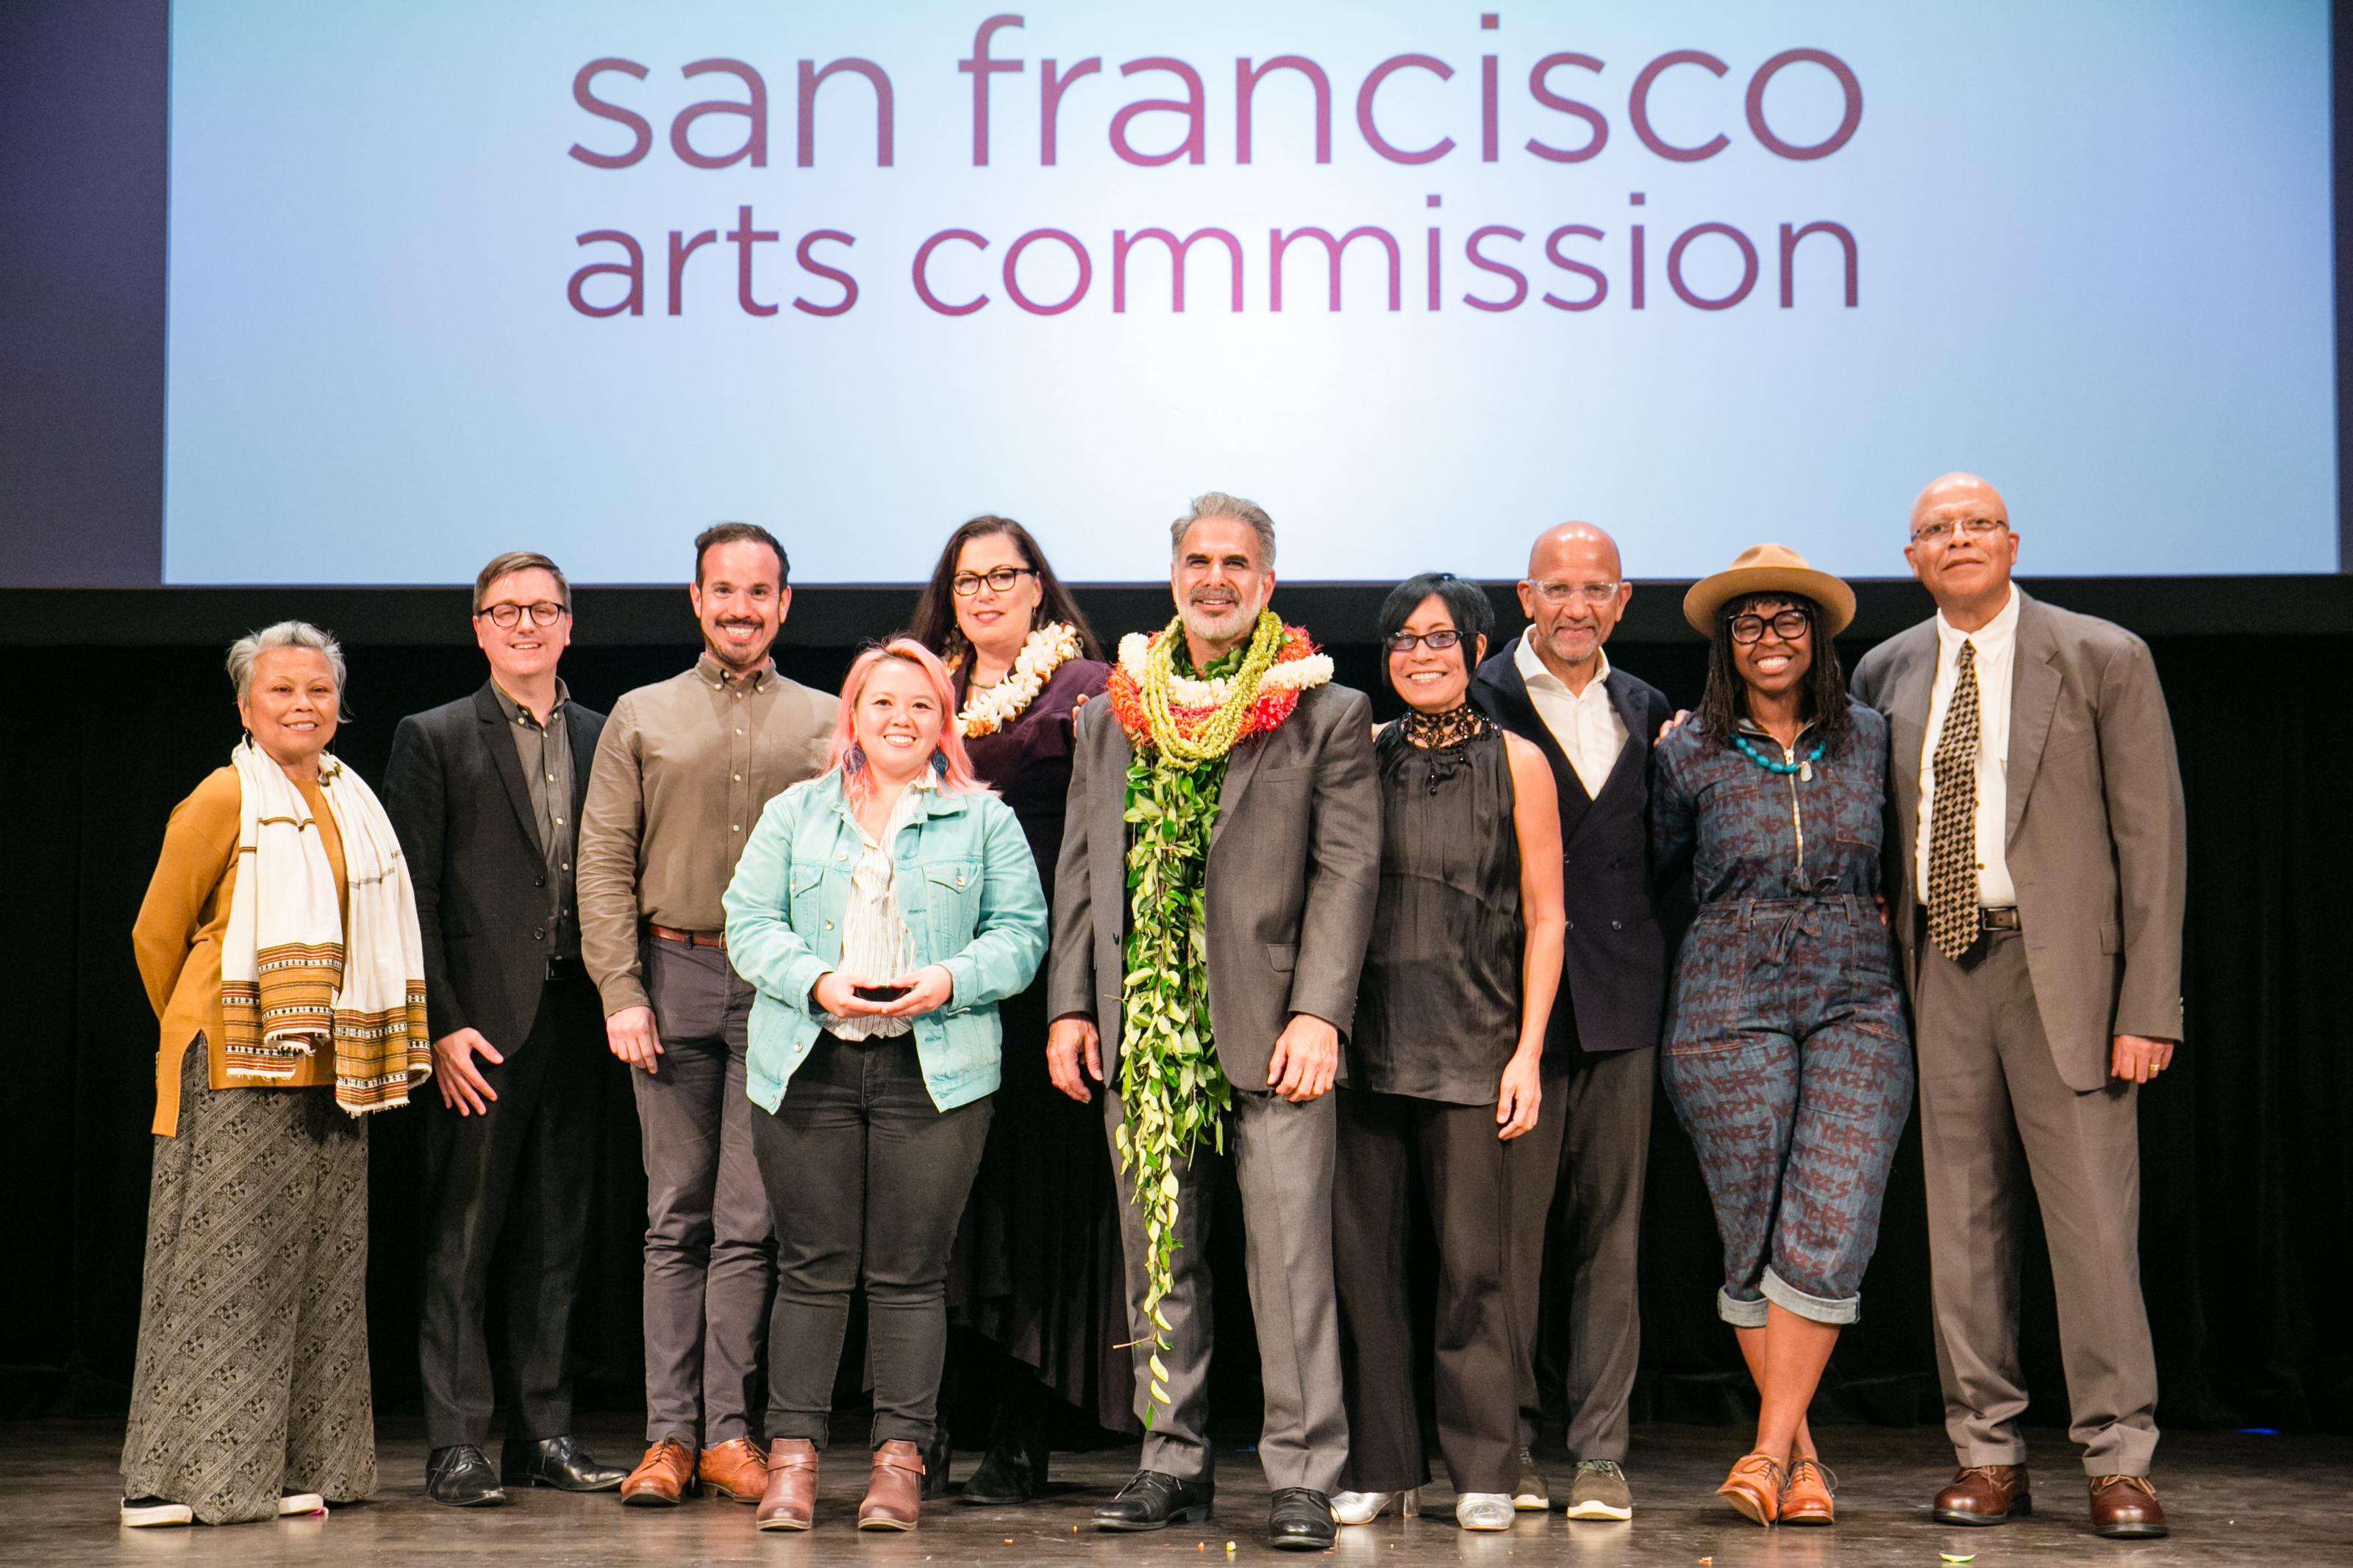 Commissioners, awardees, staff and special guests posing on stage in a group photo at the 4th Annual Grants Convening. Photo: Andria Lo